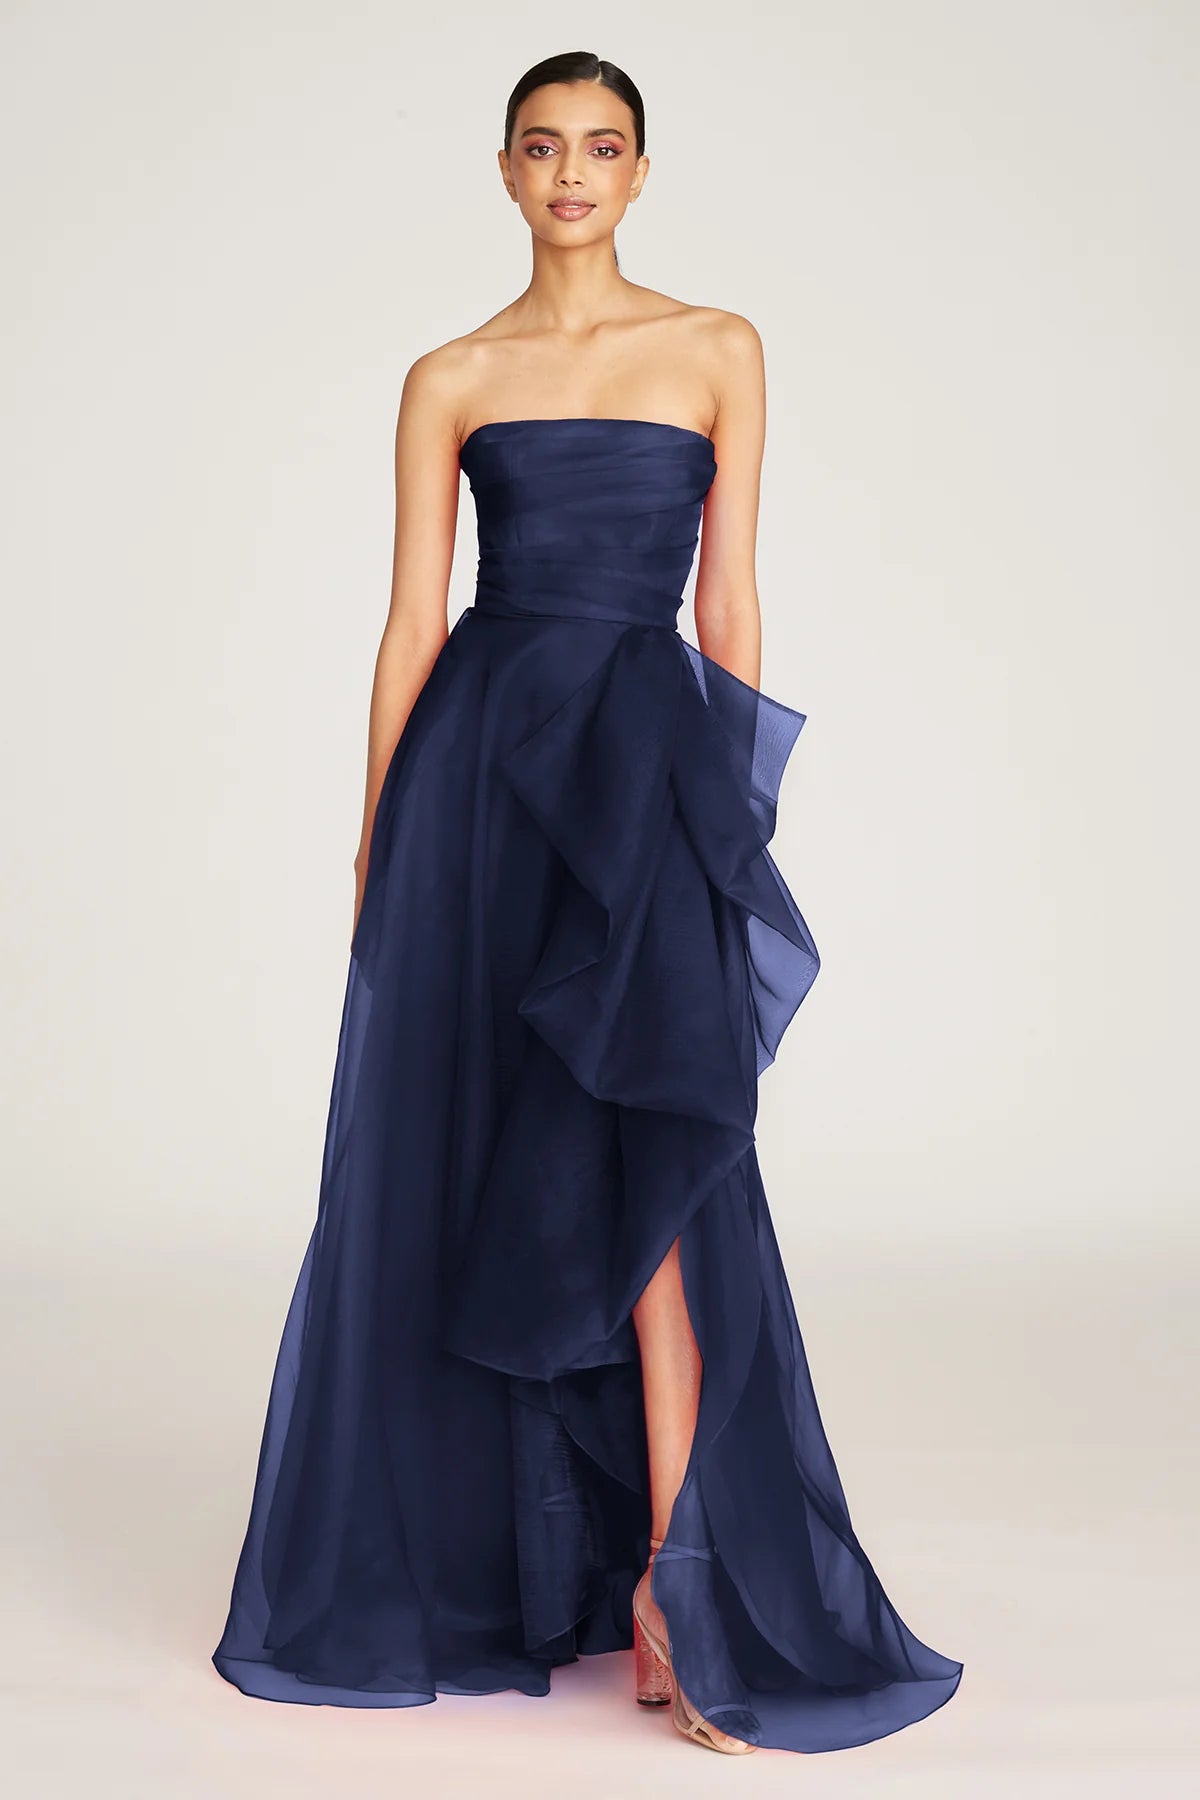 Theia 8817572 Dress | Madeline's Boutique Toronto & Boca Raton | Special Evening Events, Mother of the Bride/Groom